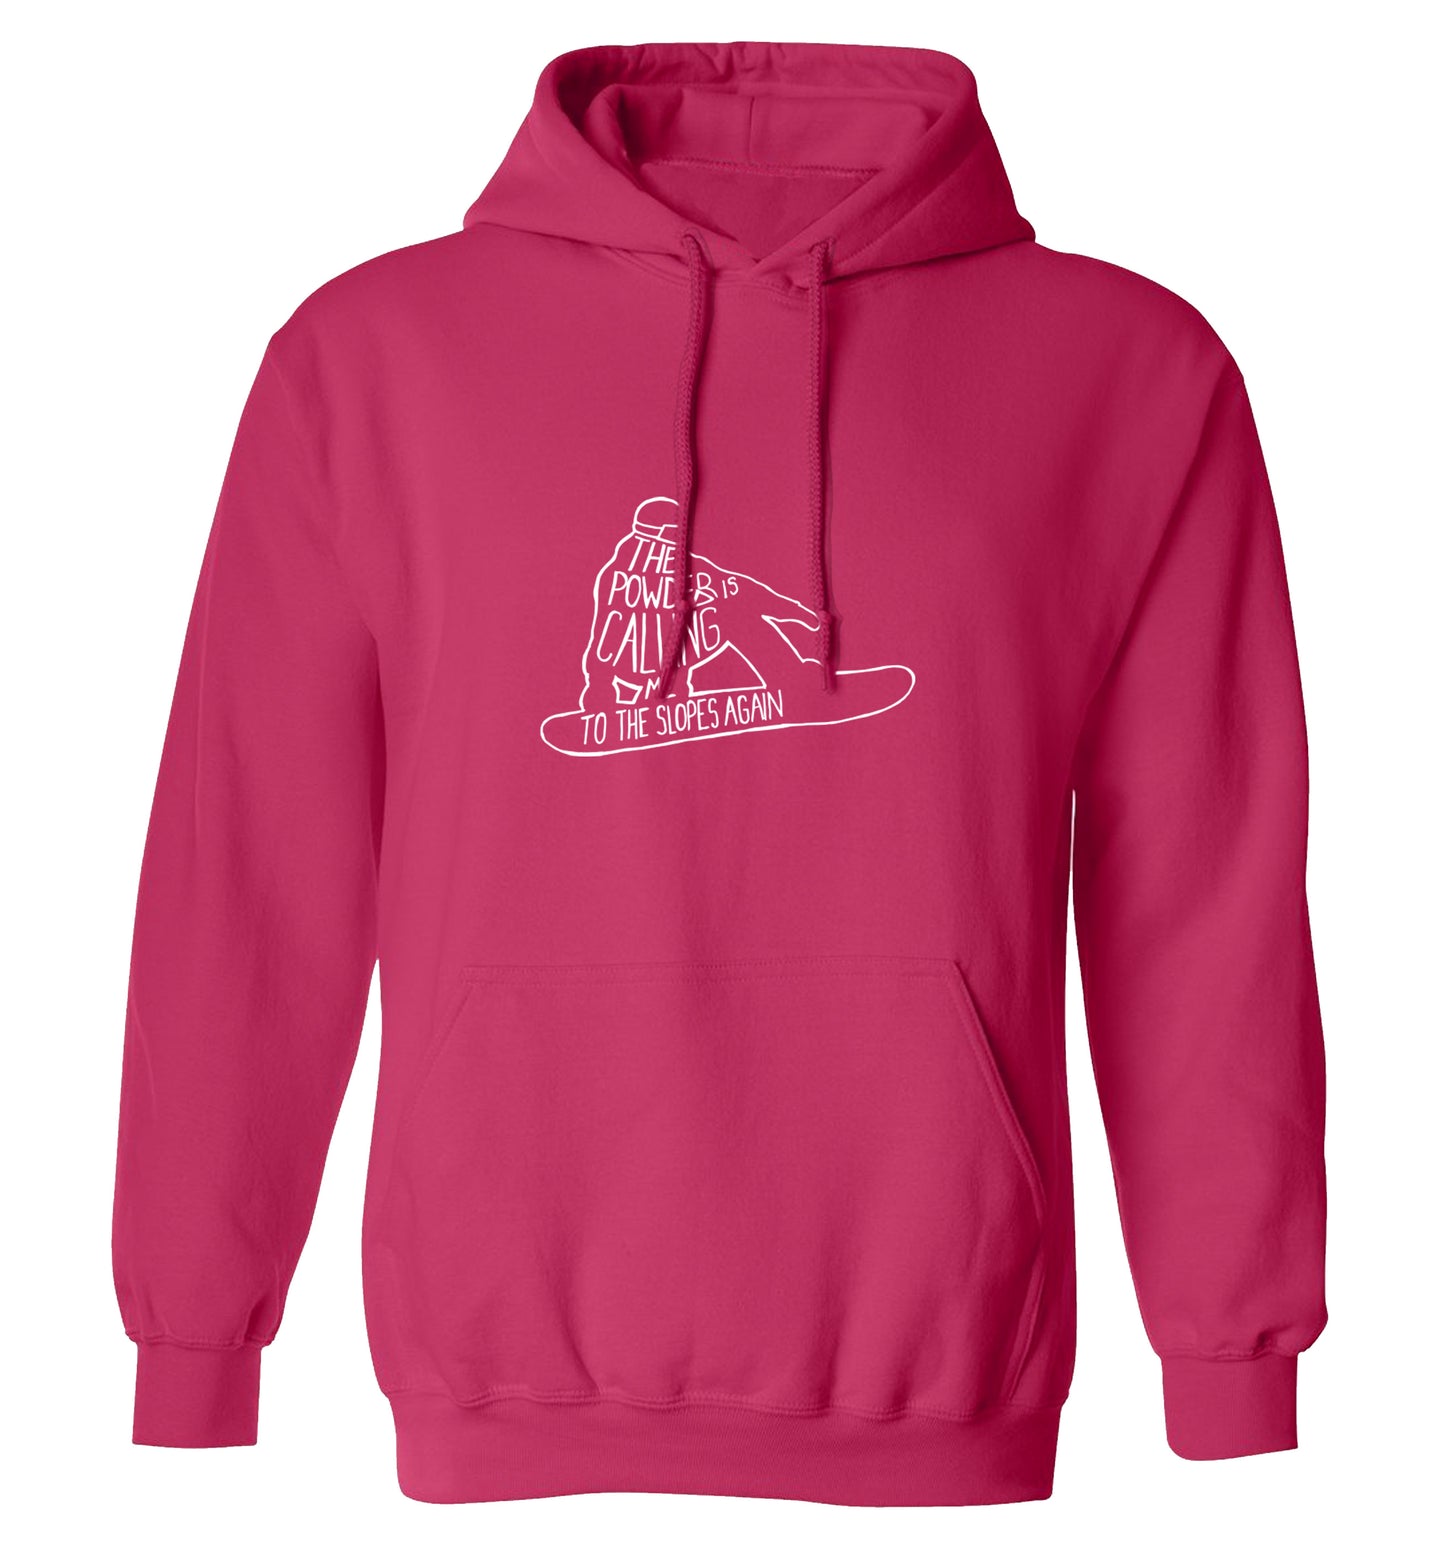 The powder is calling me to the slopes again adults unisex pink hoodie 2XL